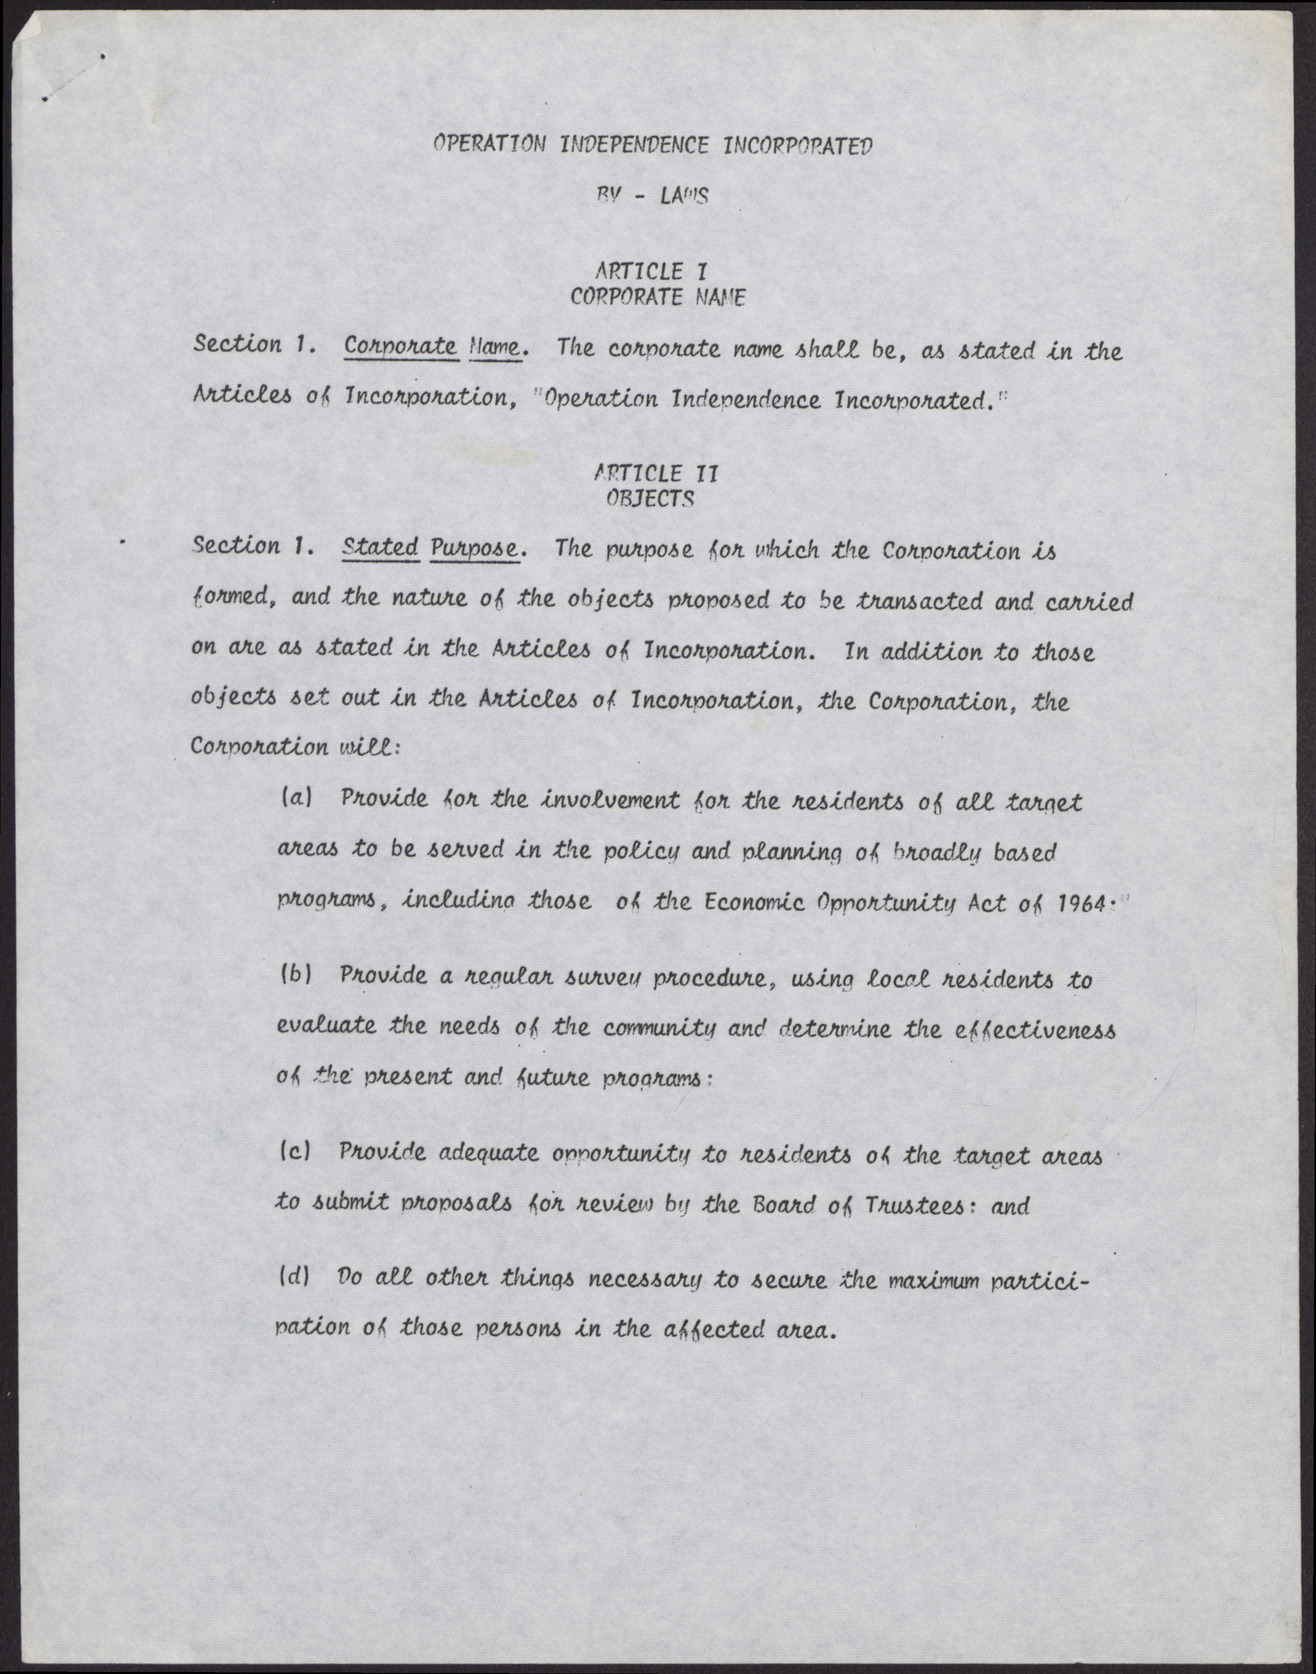 Operation Independence Incorporated Bylaws (9 pages), no date